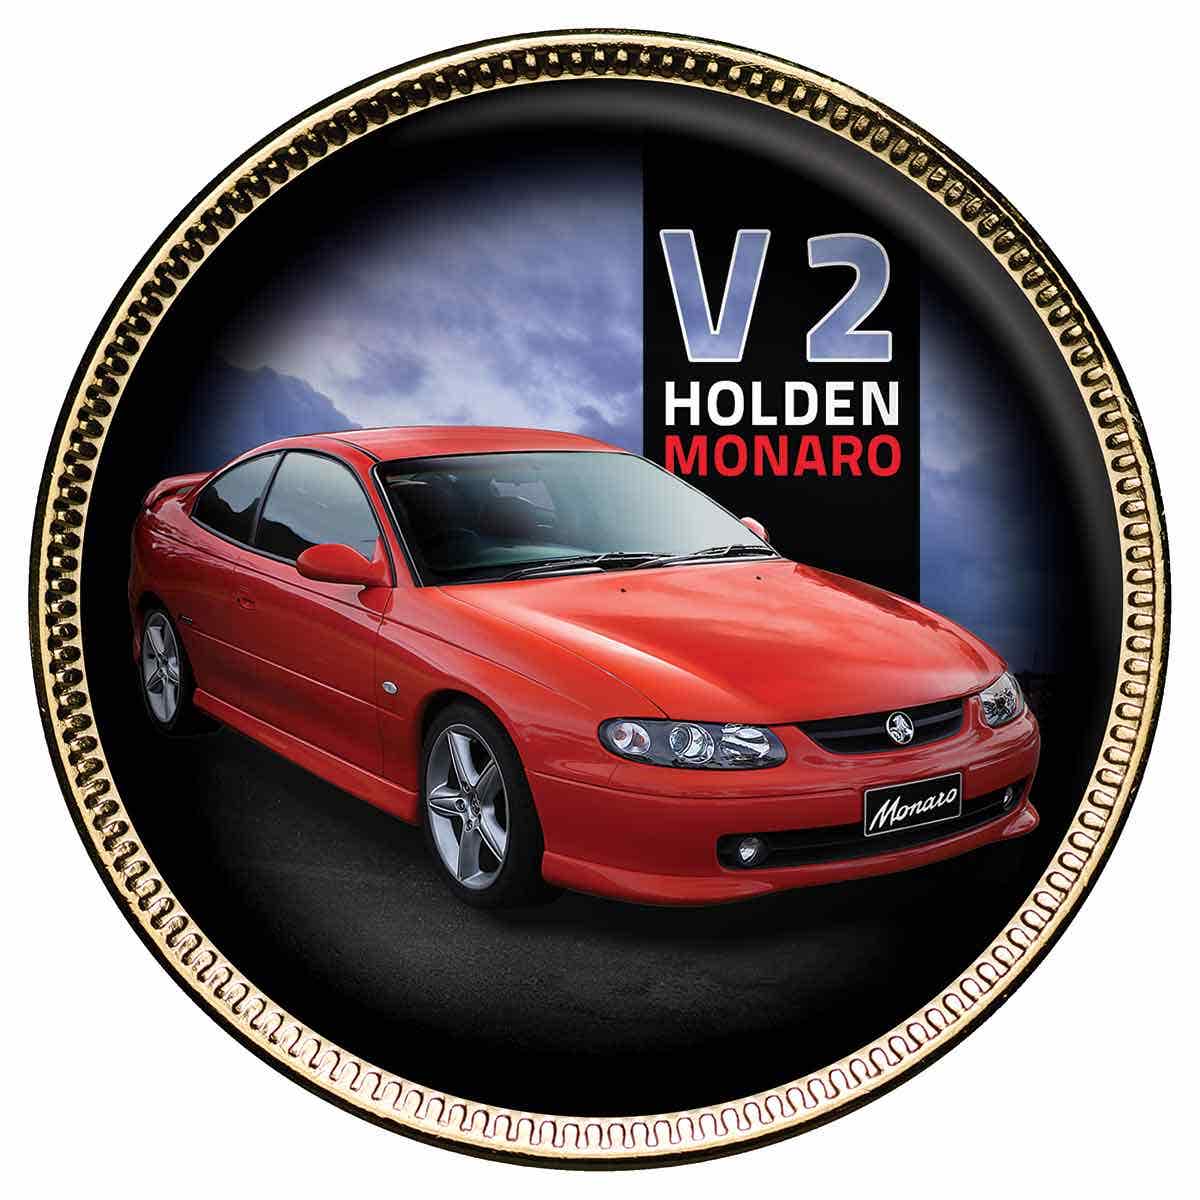 Holden Monaro Gold-plated Penny 9-Coin Collection